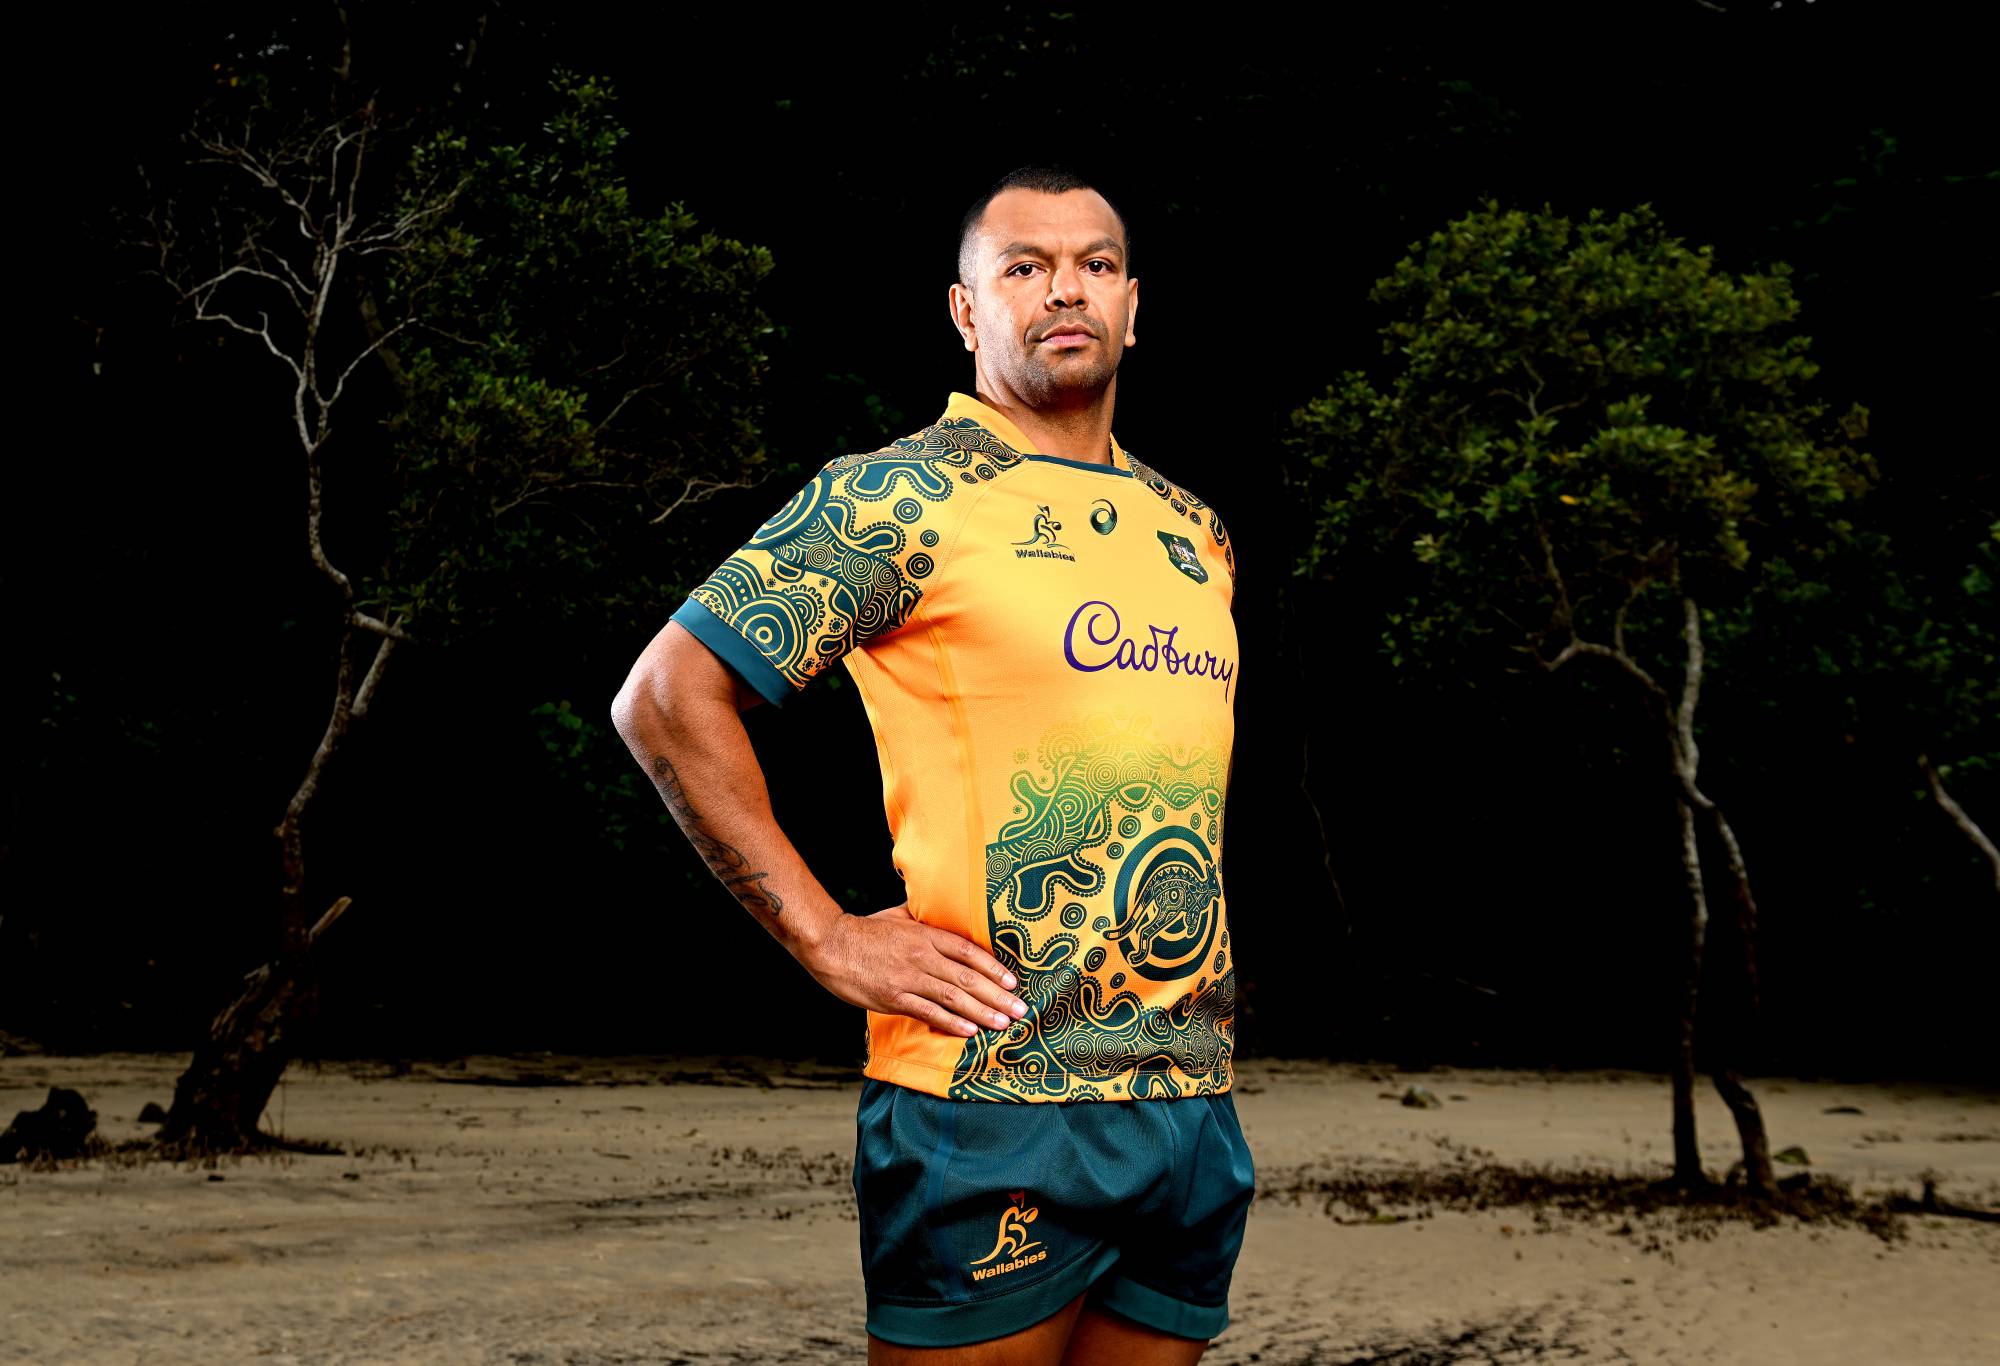 Kurtley Beale poses for a photo during the Wallabies Indigenous Jersey Launch at the Jellurgal Aboriginal Cultural Centre on July 04, 2022 in Gold Coast, Australia. (Photo by Bradley Kanaris/Getty Images)